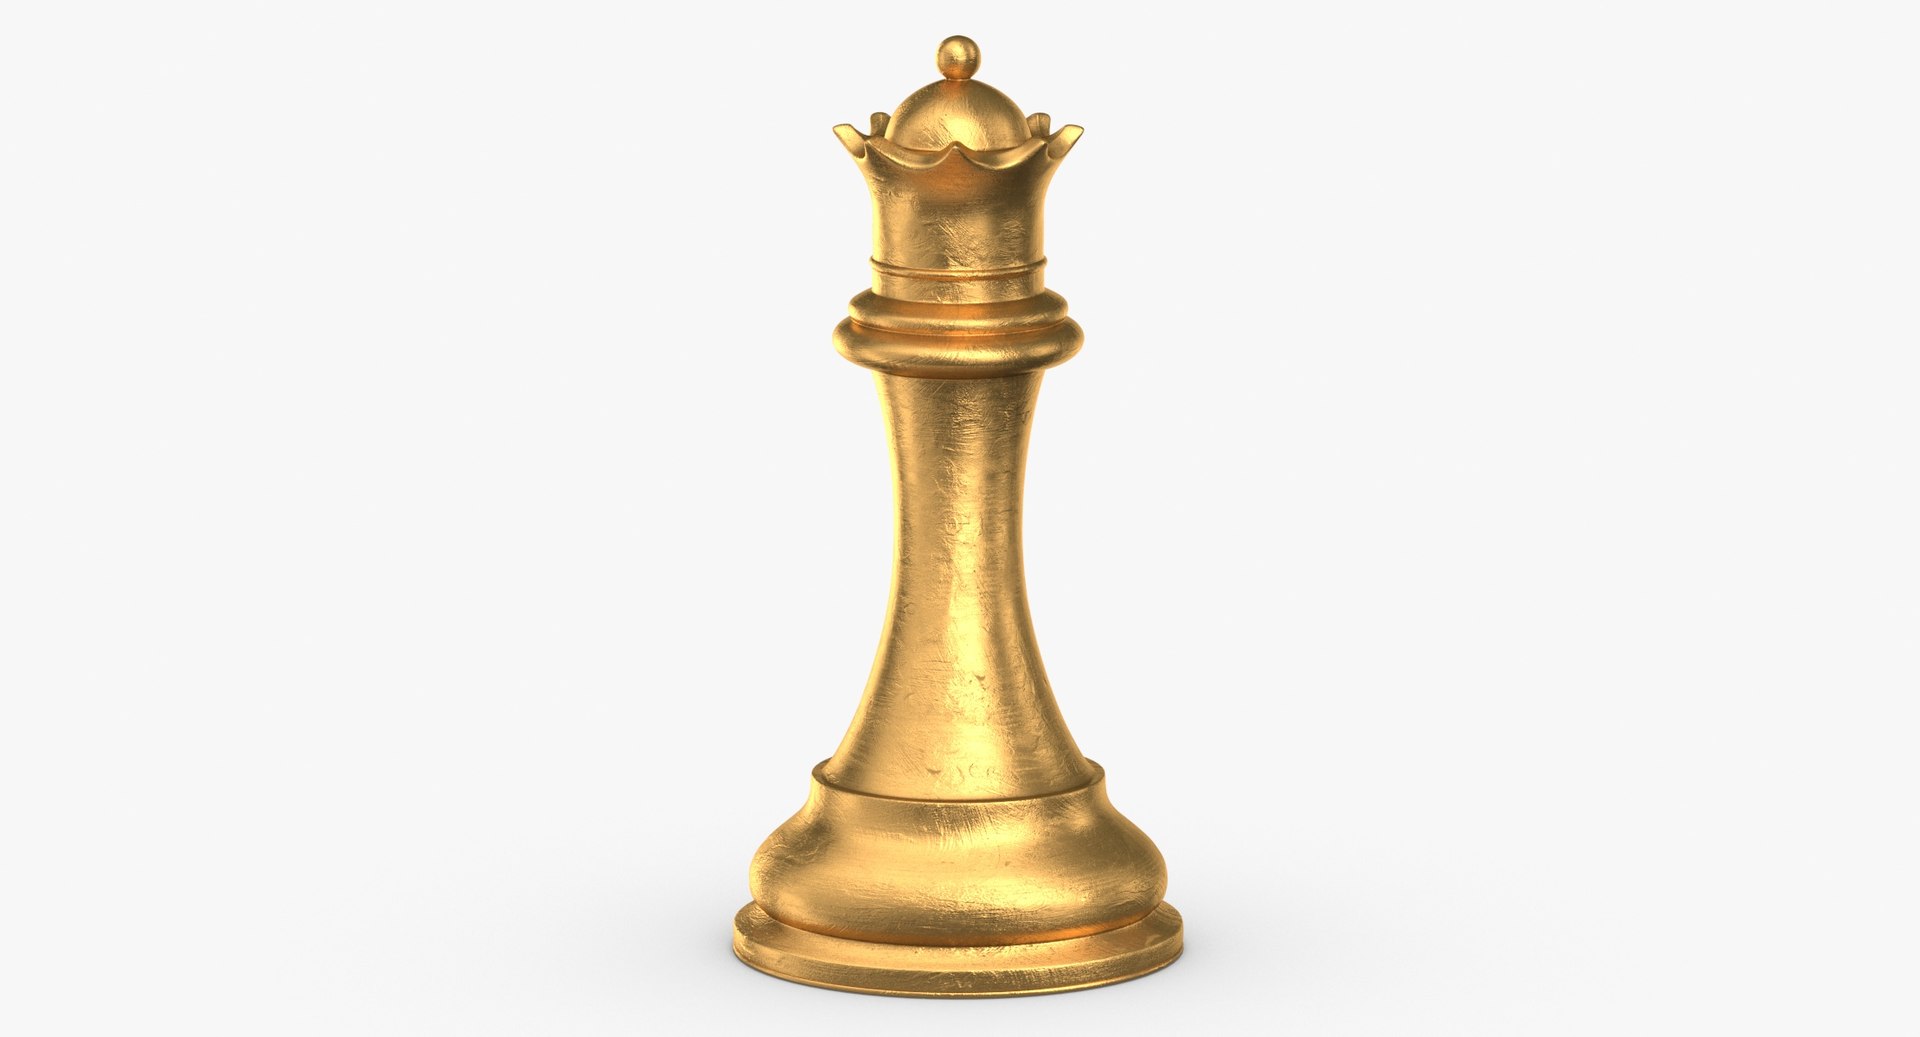 Queen Chess Piece Tattoo Meaning - wide 4